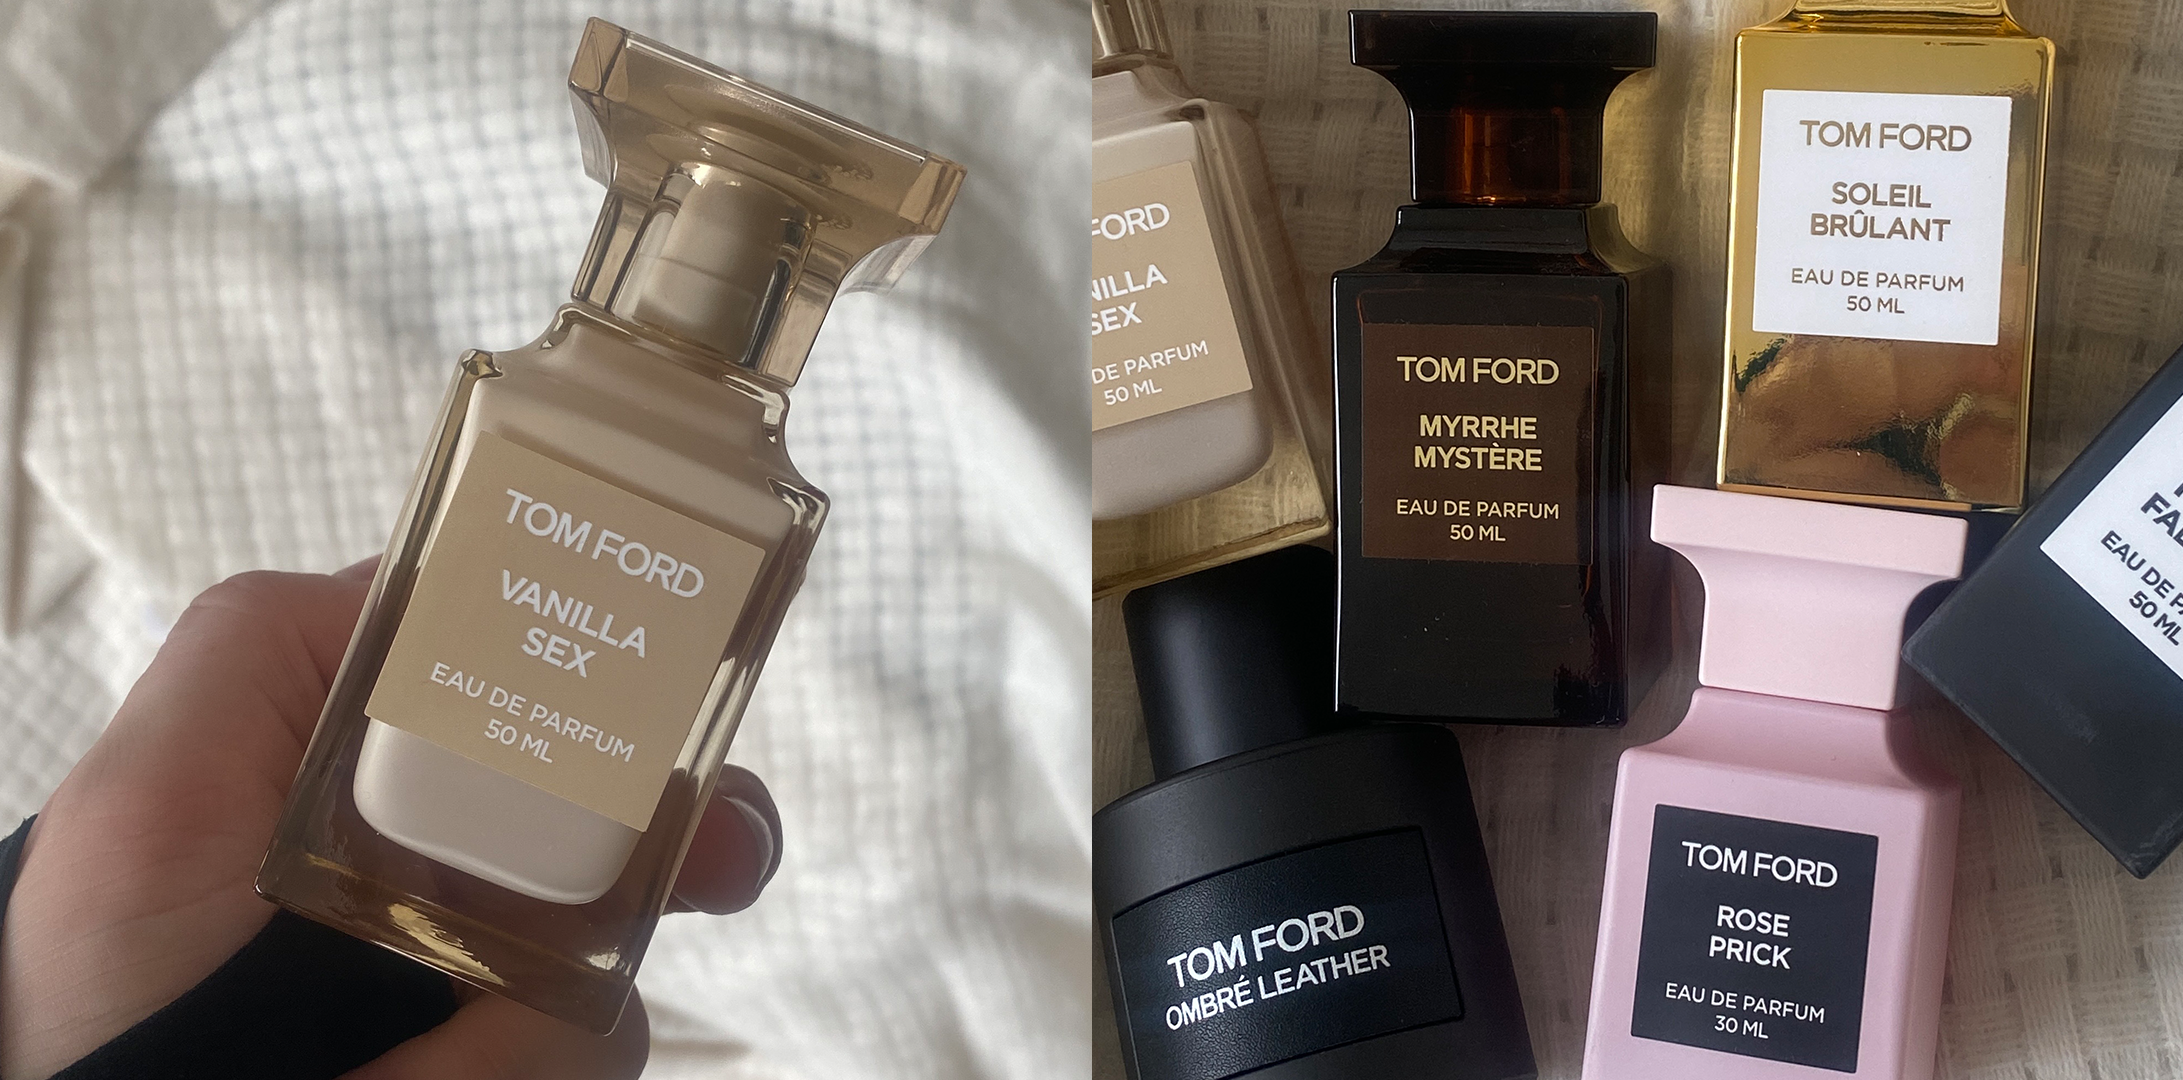 <p class="body-dropcap">Tom Ford is hands down one of my all-time favorite perfume brands. The scents are captivating, the bottles are ultra chic, the fragrance names are just too good (<a href="https://go.redirectingat.com?id=74968X1553576&url=https%3A%2F%2Fwww.nordstrom.com%2Fs%2Ftom-ford-private-blend-fabulous-eau-de-parfum%2F4848707&sref=https%3A%2F%2Fwww.cosmopolitan.com%2Fstyle-beauty%2Fbeauty%2Fg46400587%2Fbest-tom-ford-perfumes%2F">f****** Fabulous</a>, anyone?), and the feeling you get after spritizing one on is peak bougie. But I also completely understand that the <a href="https://www.cosmopolitan.com/style-beauty/beauty/g26477382/best-perfumes/">best perfumes</a> from my favorite brand are v expensive, and making it to a <a href="https://go.redirectingat.com?id=74968X1553576&url=https%3A%2F%2Fwww.sephora.com%2Fbrand%2Ftom-ford%2Ffragrance&sref=https%3A%2F%2Fwww.cosmopolitan.com%2Fstyle-beauty%2Fbeauty%2Fg46400587%2Fbest-tom-ford-perfumes%2F">Sephora</a> or <a href="https://go.redirectingat.com?id=74968X1553576&url=https%3A%2F%2Fwww.nordstrom.com%2Fbrands%2Ftom-ford--5113%2Fbeauty%2Ffragrance%3Fbreadcrumb%3DHome%252FBrands%252FTOM%2BFORD--5113%252FBeauty%252FFragrance&sref=https%3A%2F%2Fwww.cosmopolitan.com%2Fstyle-beauty%2Fbeauty%2Fg46400587%2Fbest-tom-ford-perfumes%2F">Nordstrom</a> to give them all a sniff before buying isn't easy for everyone. Hence why I did the <em>very </em>hard work of testing every single Tom Ford perfume on my skin, asking coworkers and friends for their thoughts, and then compiling a full list of my favorites. Here's a preview of my top picks: </p><p>Let's get into all of my favorite Tom Ford perfumes, from boozy nighttime scents to sweet cherry options and a whole lotta sexy, spicy leather notes. Plus, if you still aren't sure if a particular Tom Ford perfume is for you, I'm sharing my secrets on how to choose the right perfume for your collection.</p>